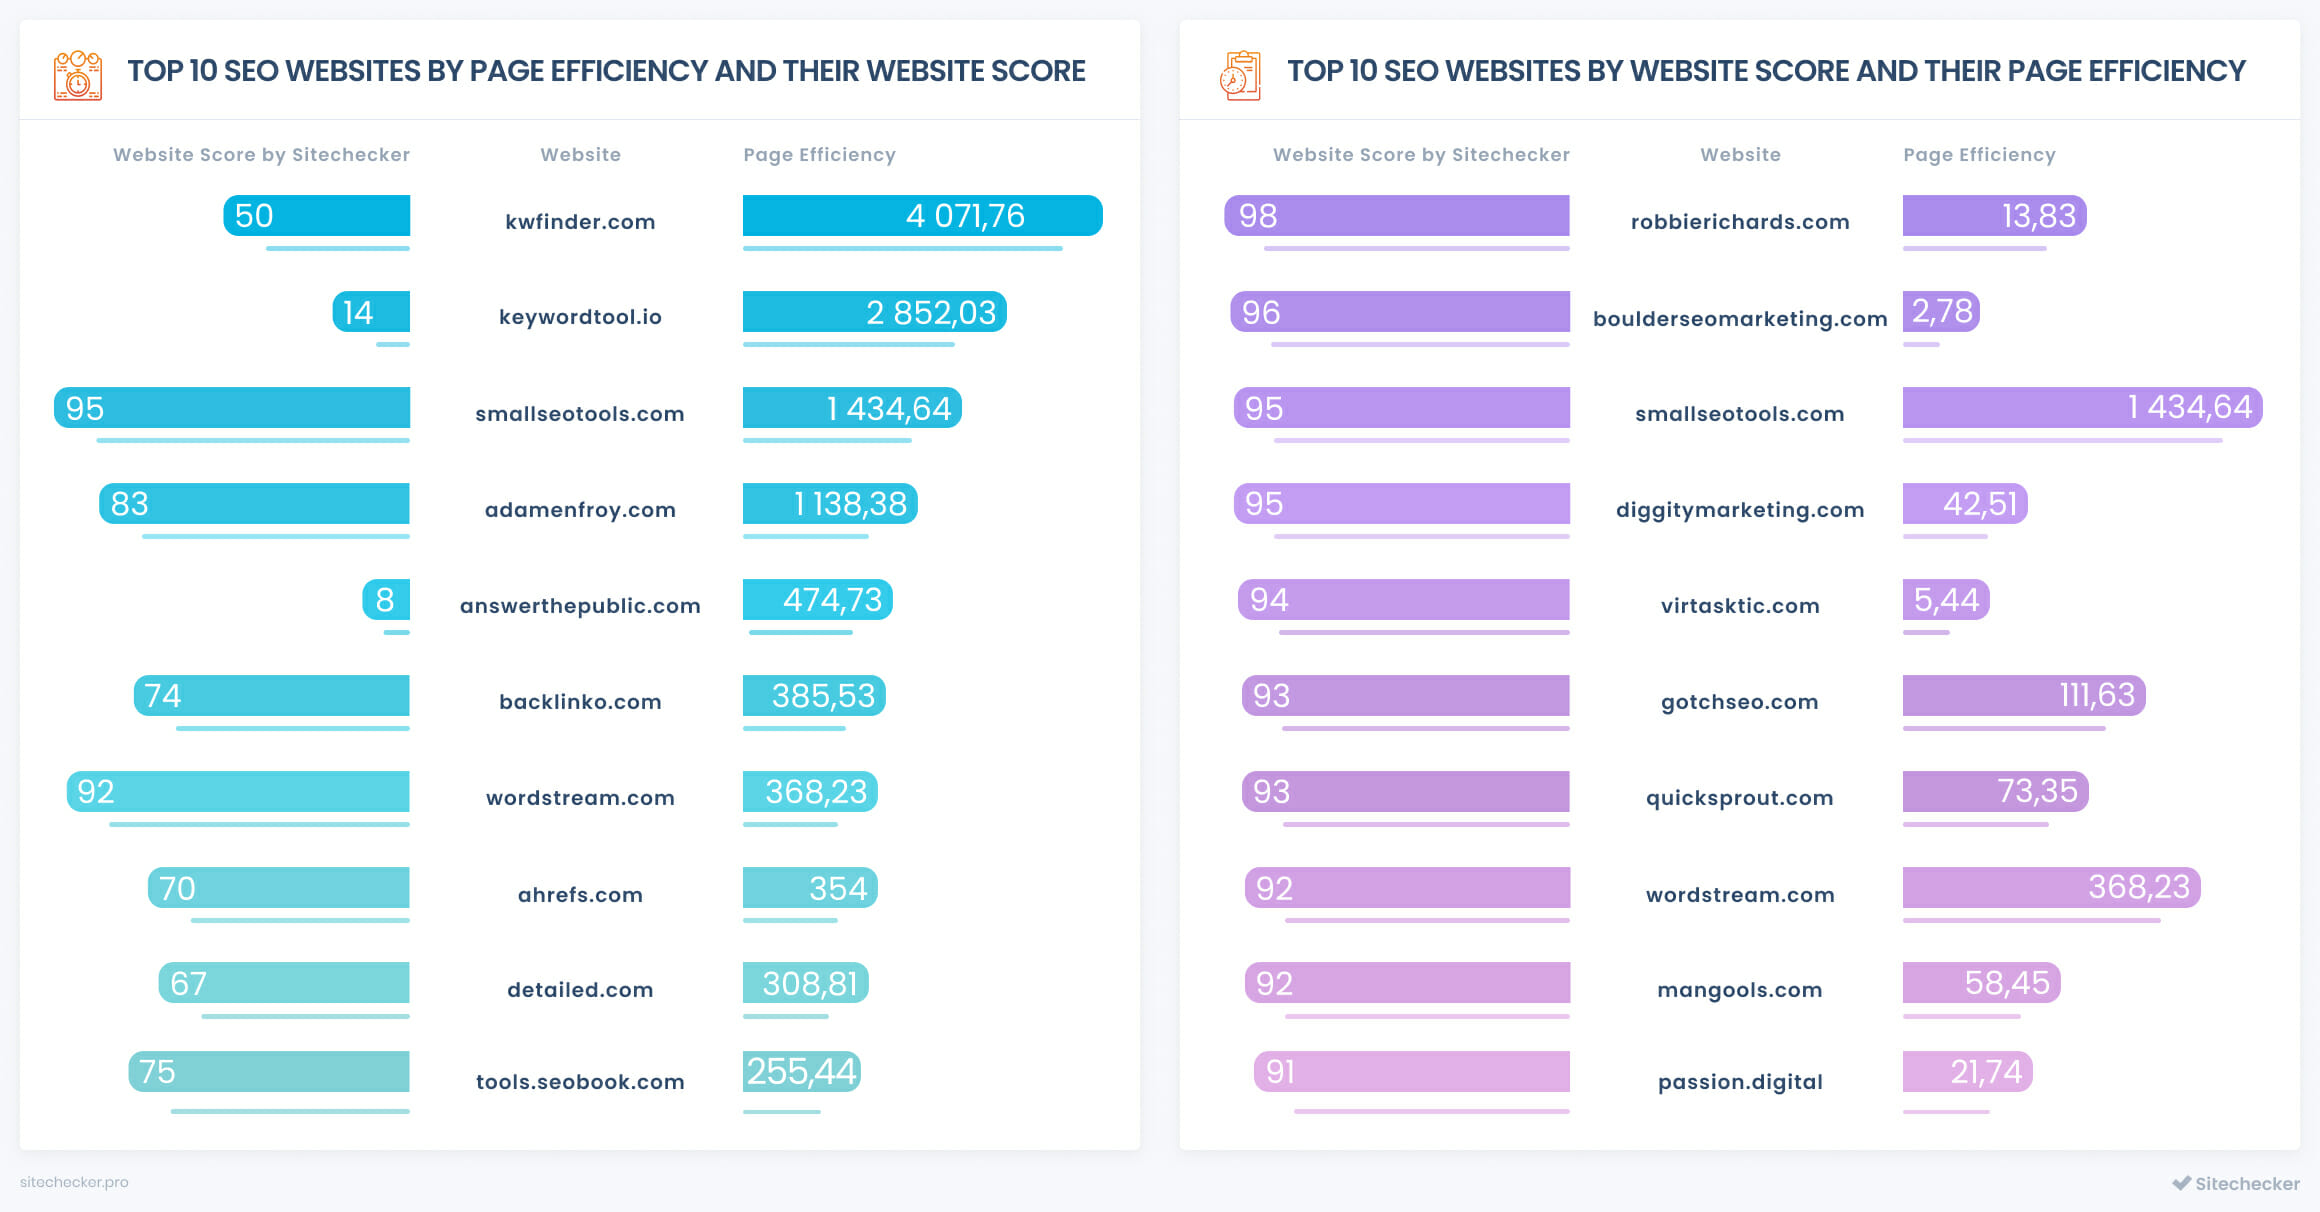 top seo companies by page efficiency and website score